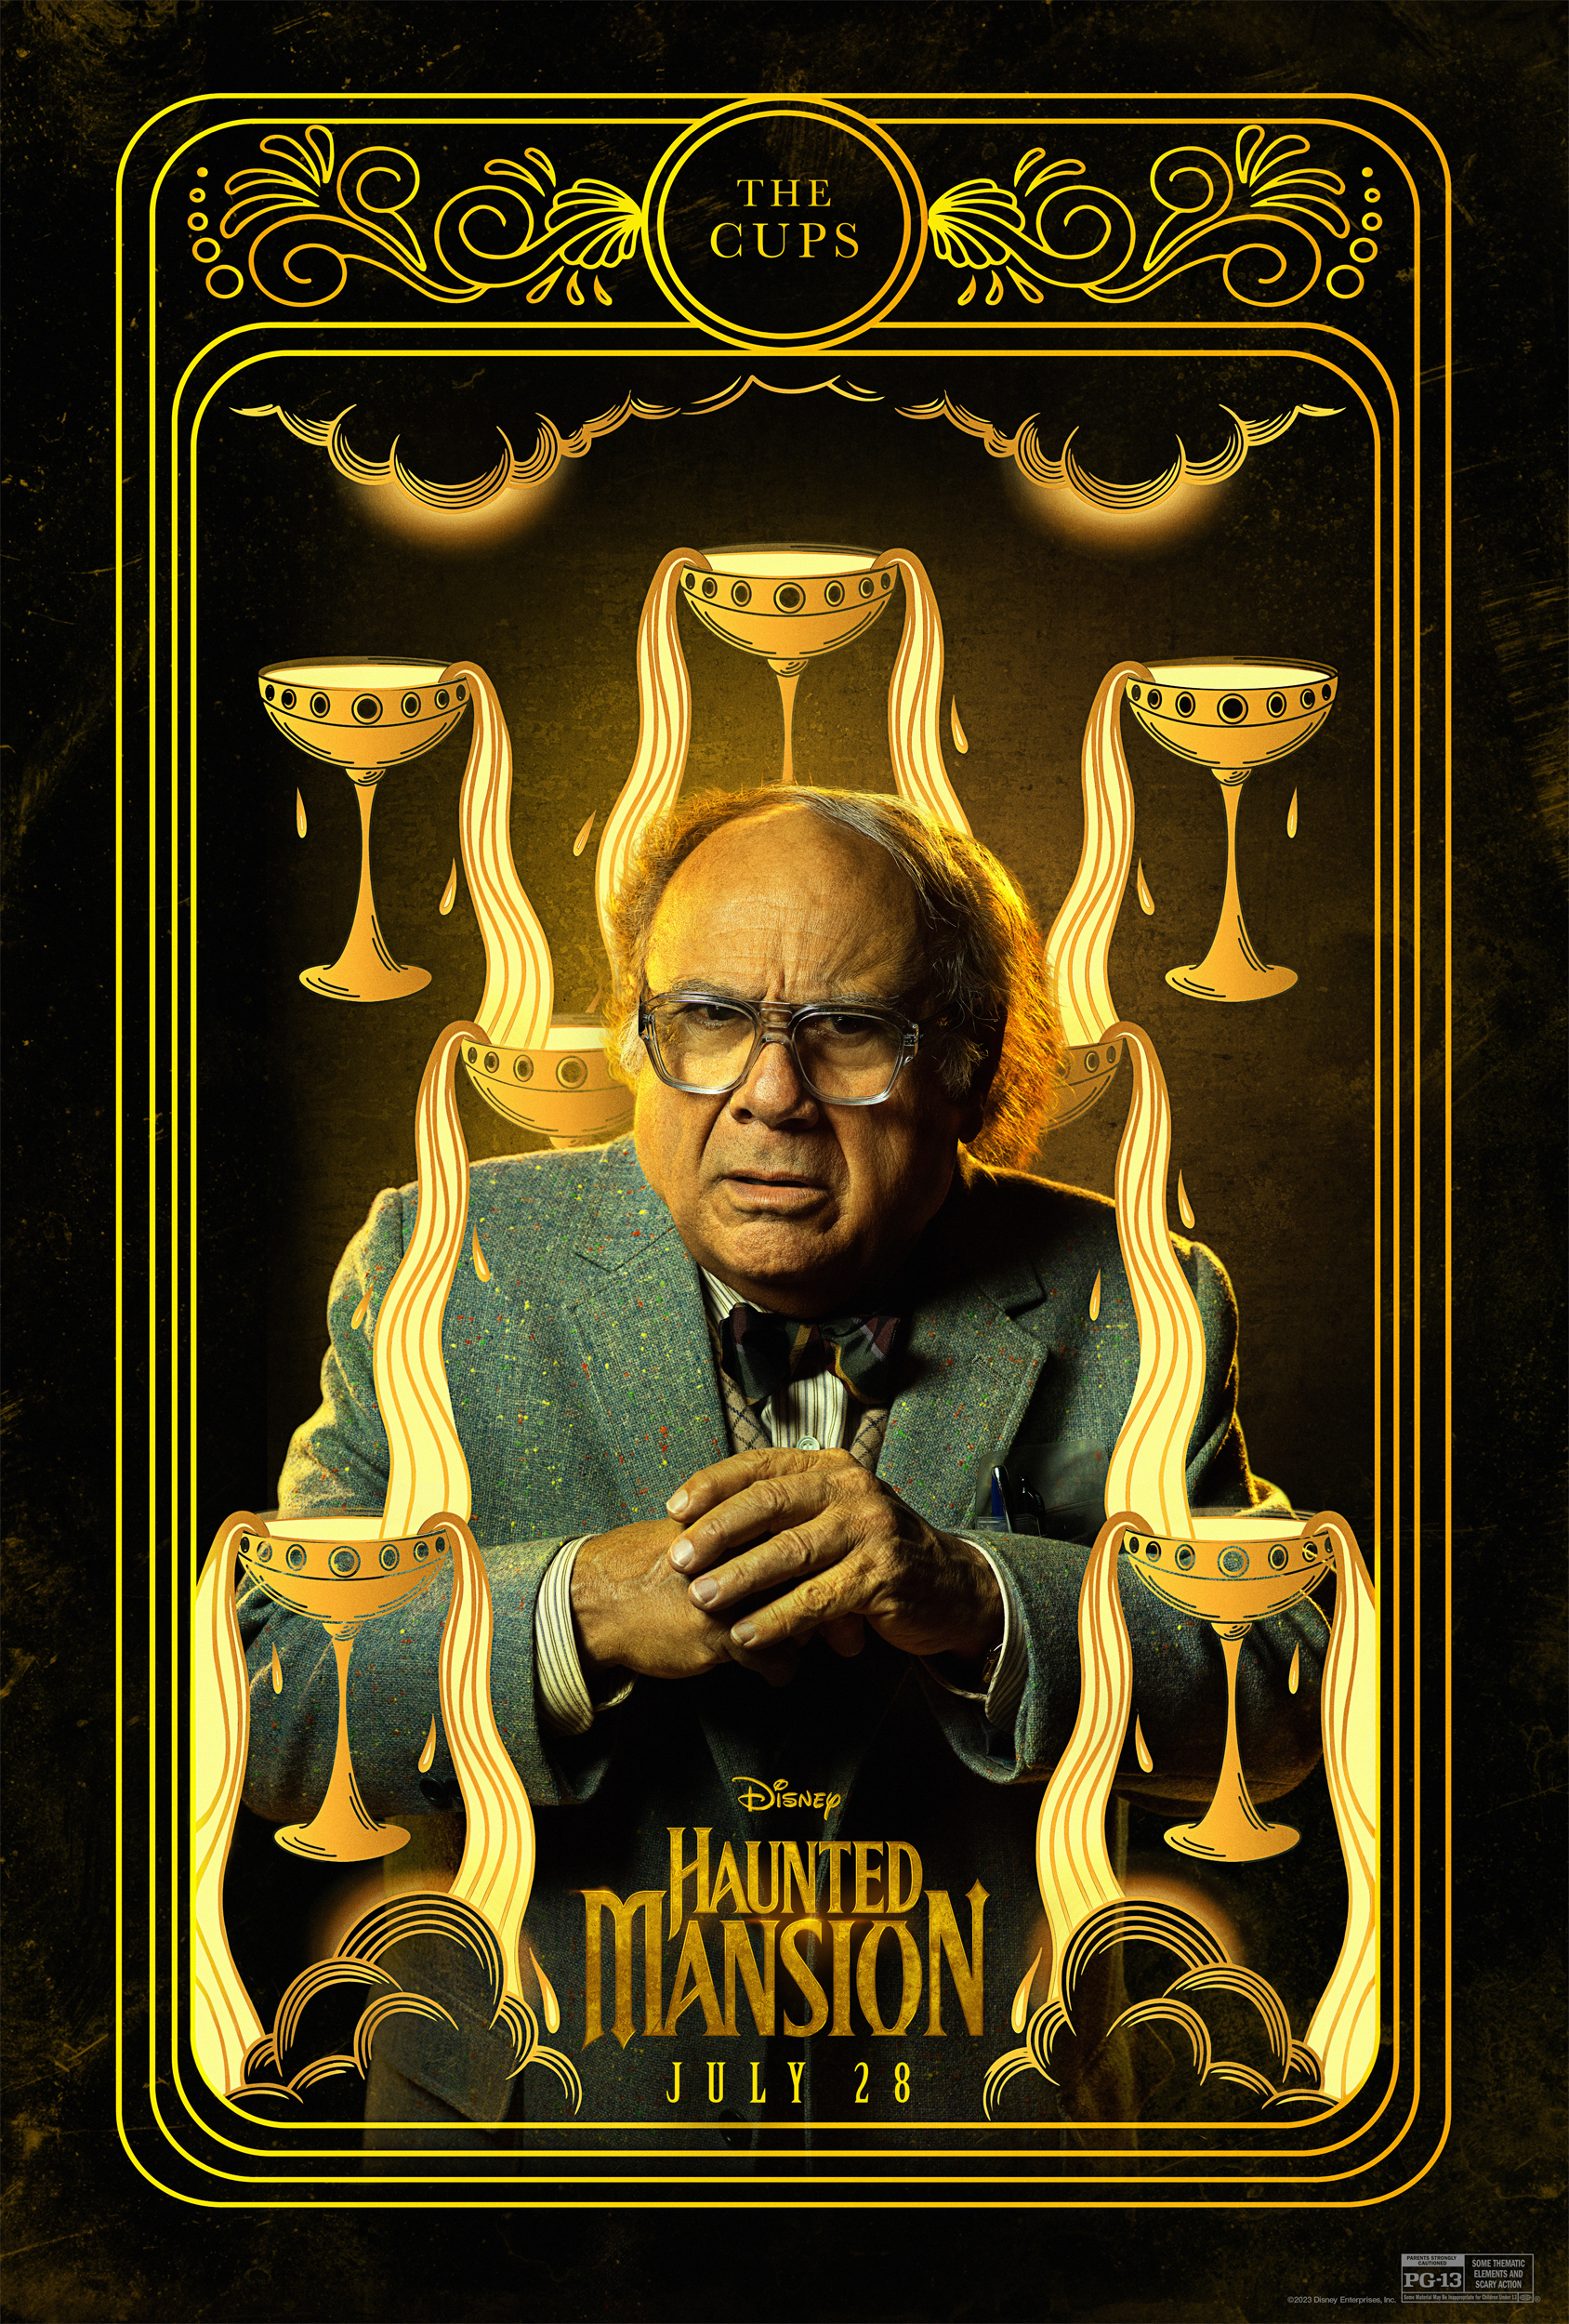 Alt-text: Phone wallpaper featuring a stylized Haunted Mansion movie poster with tarot card-inspired design.